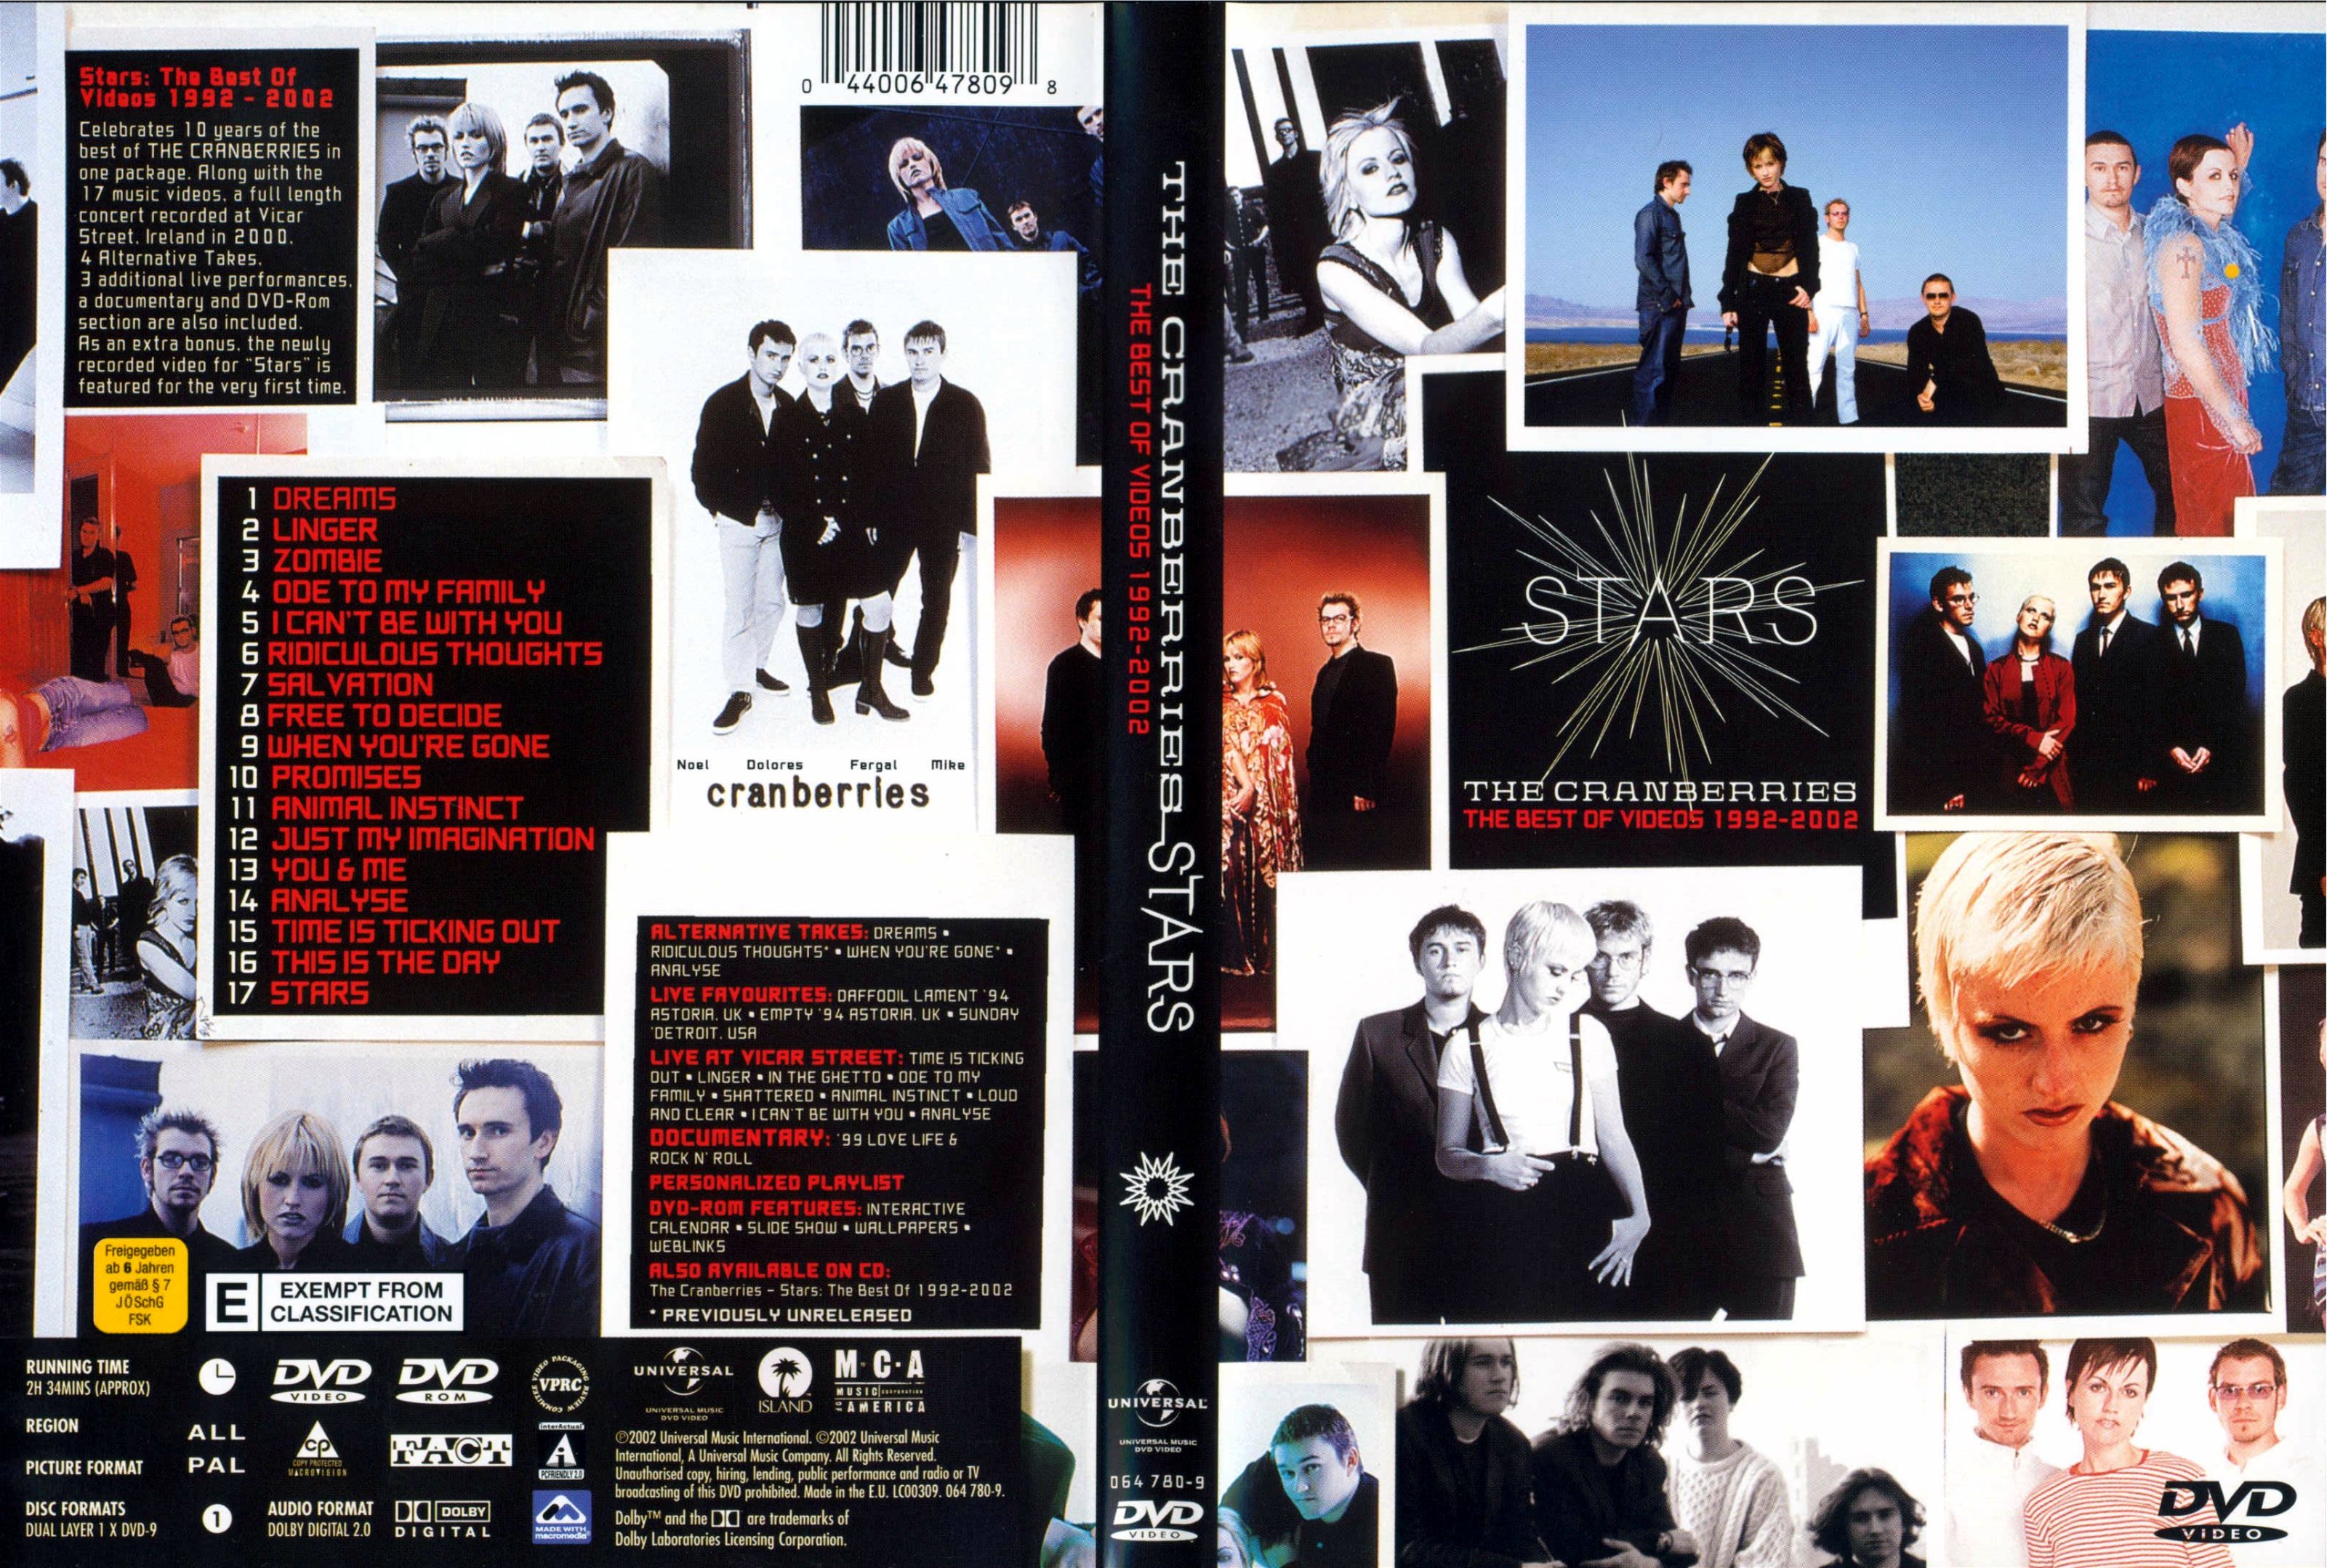 Jaquette DVD The cranberries the best of videos 1992 2002